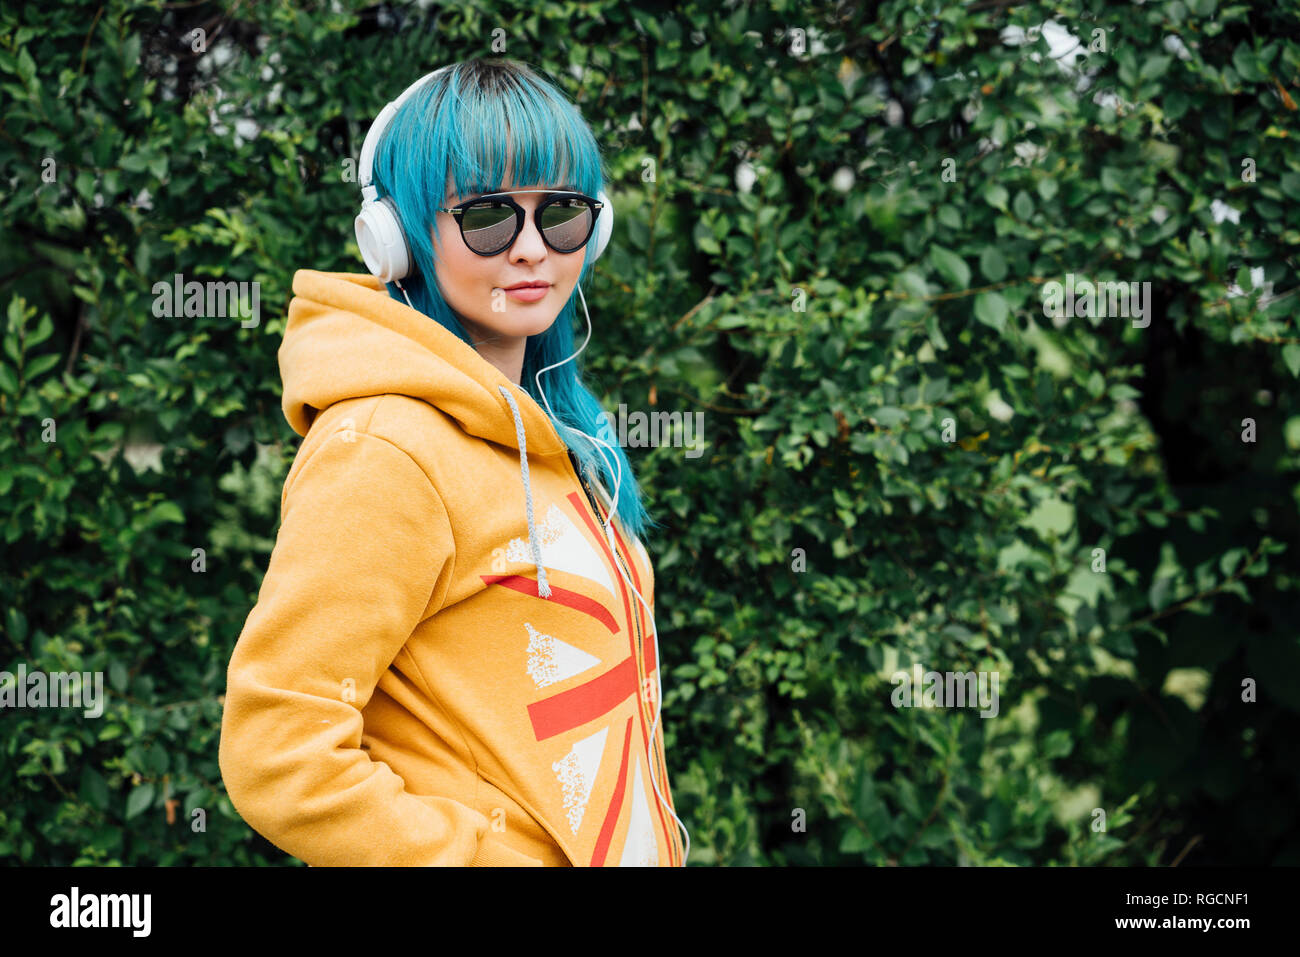 Portrait of young woman with dyed blue hair and headphones wearing yellow hooded jacket Stock Photo